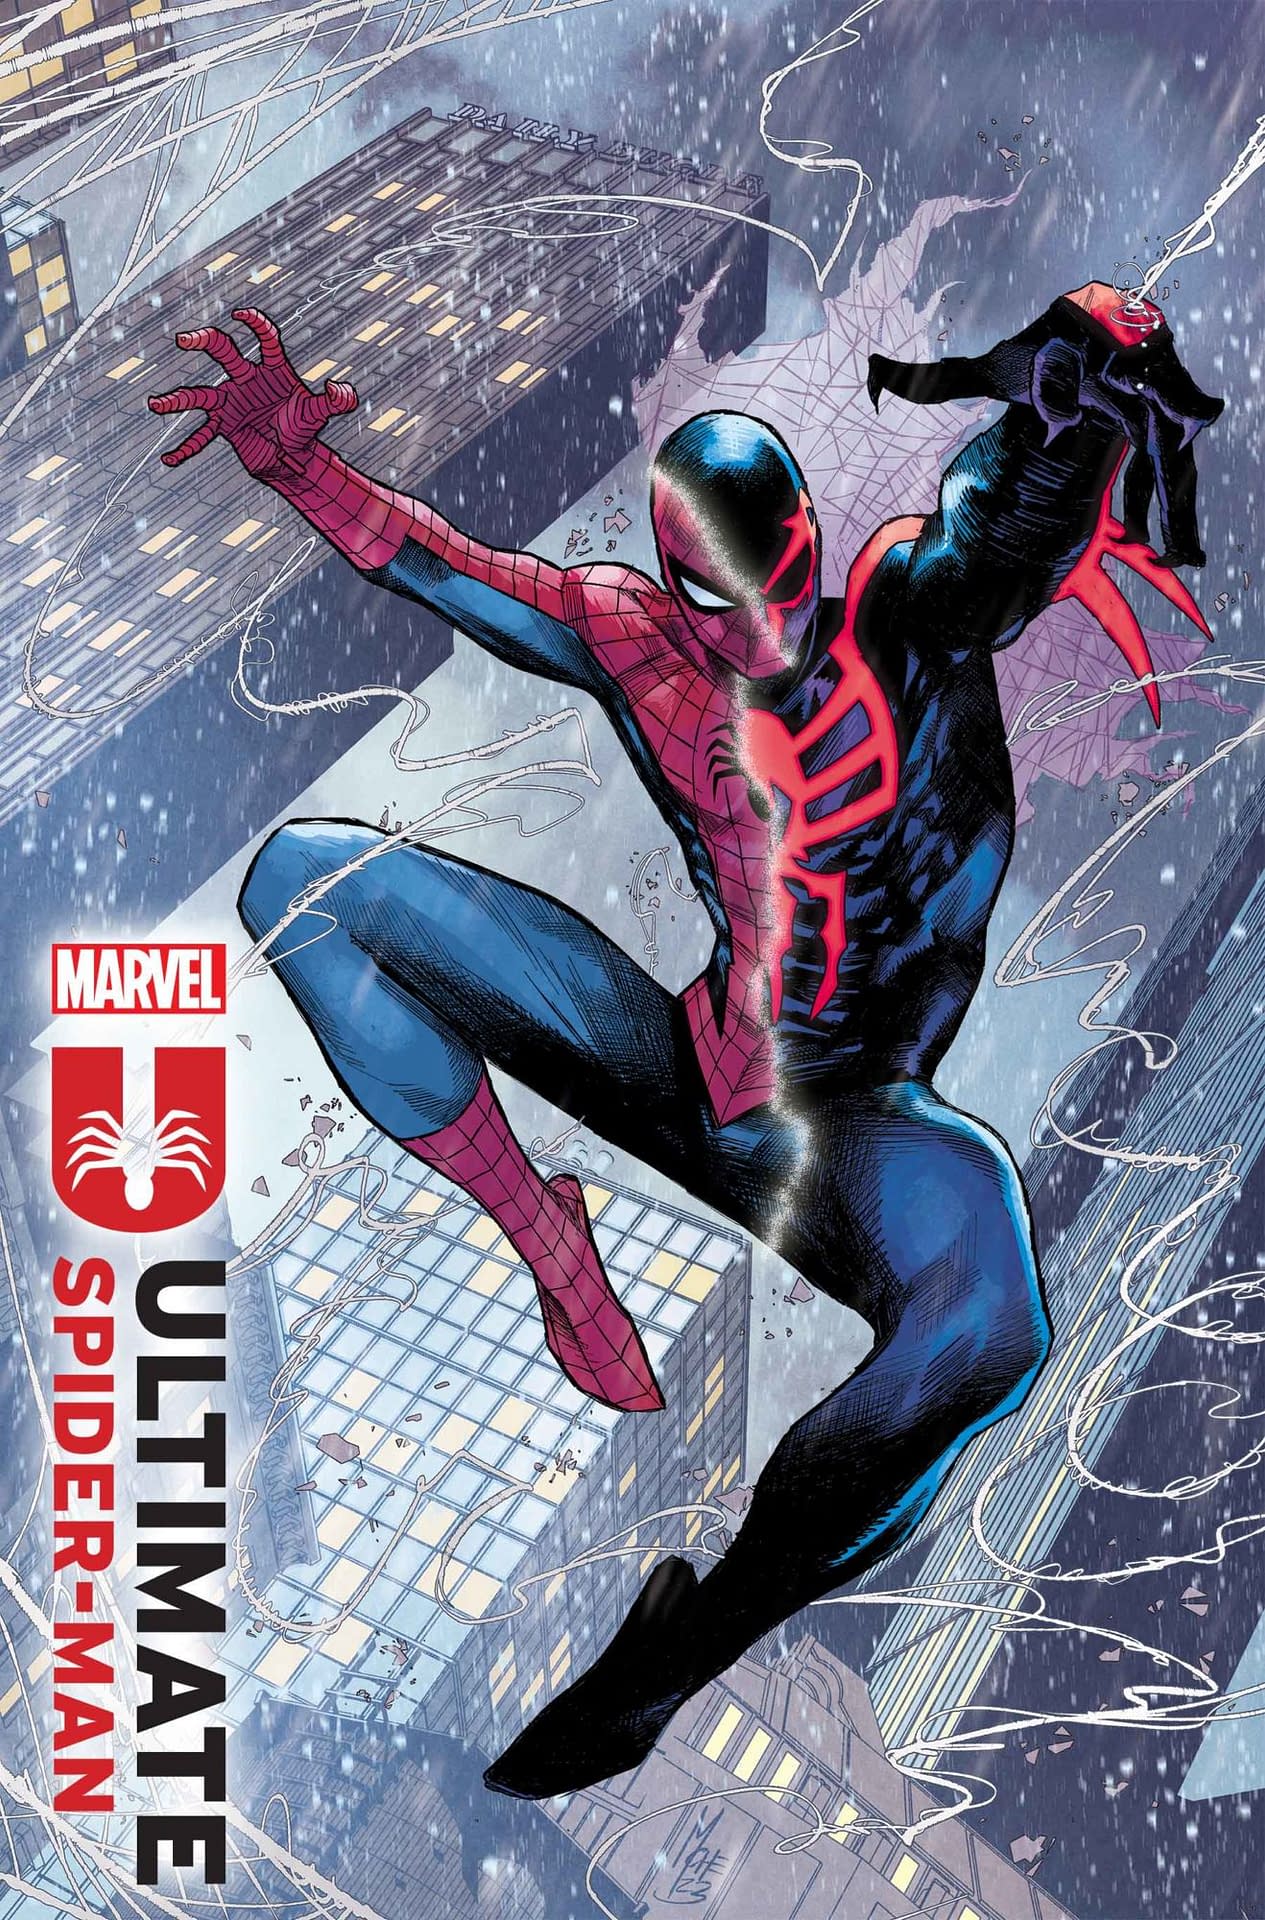 So Who Is The New Ultimate SpiderMan, Then?